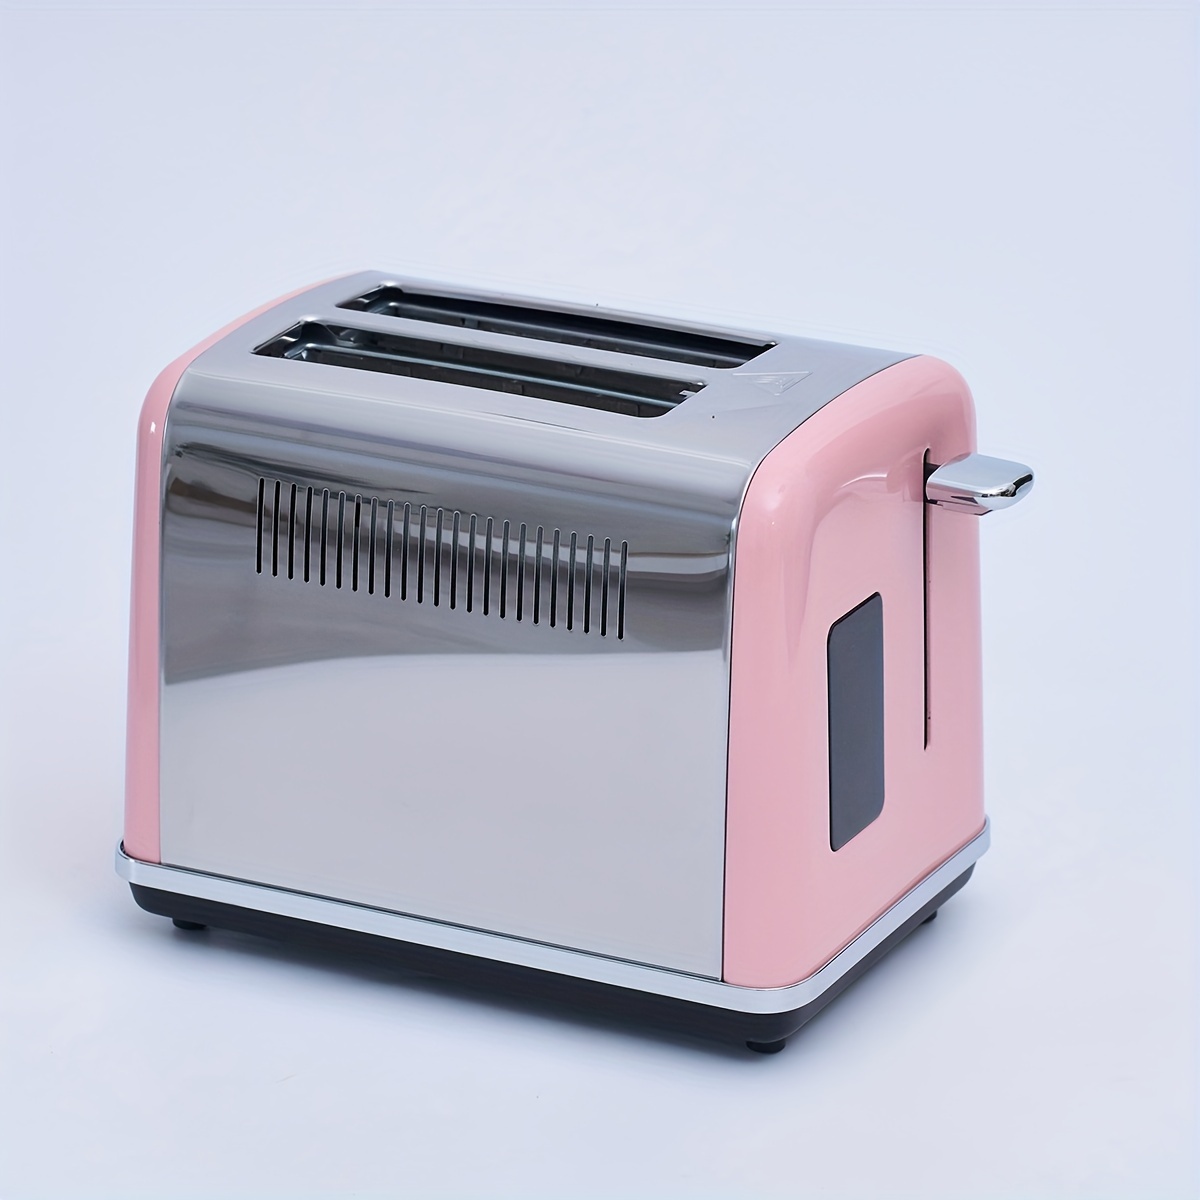 Touchscreen 2-Slice Black Wide Slot Toaster in 2023